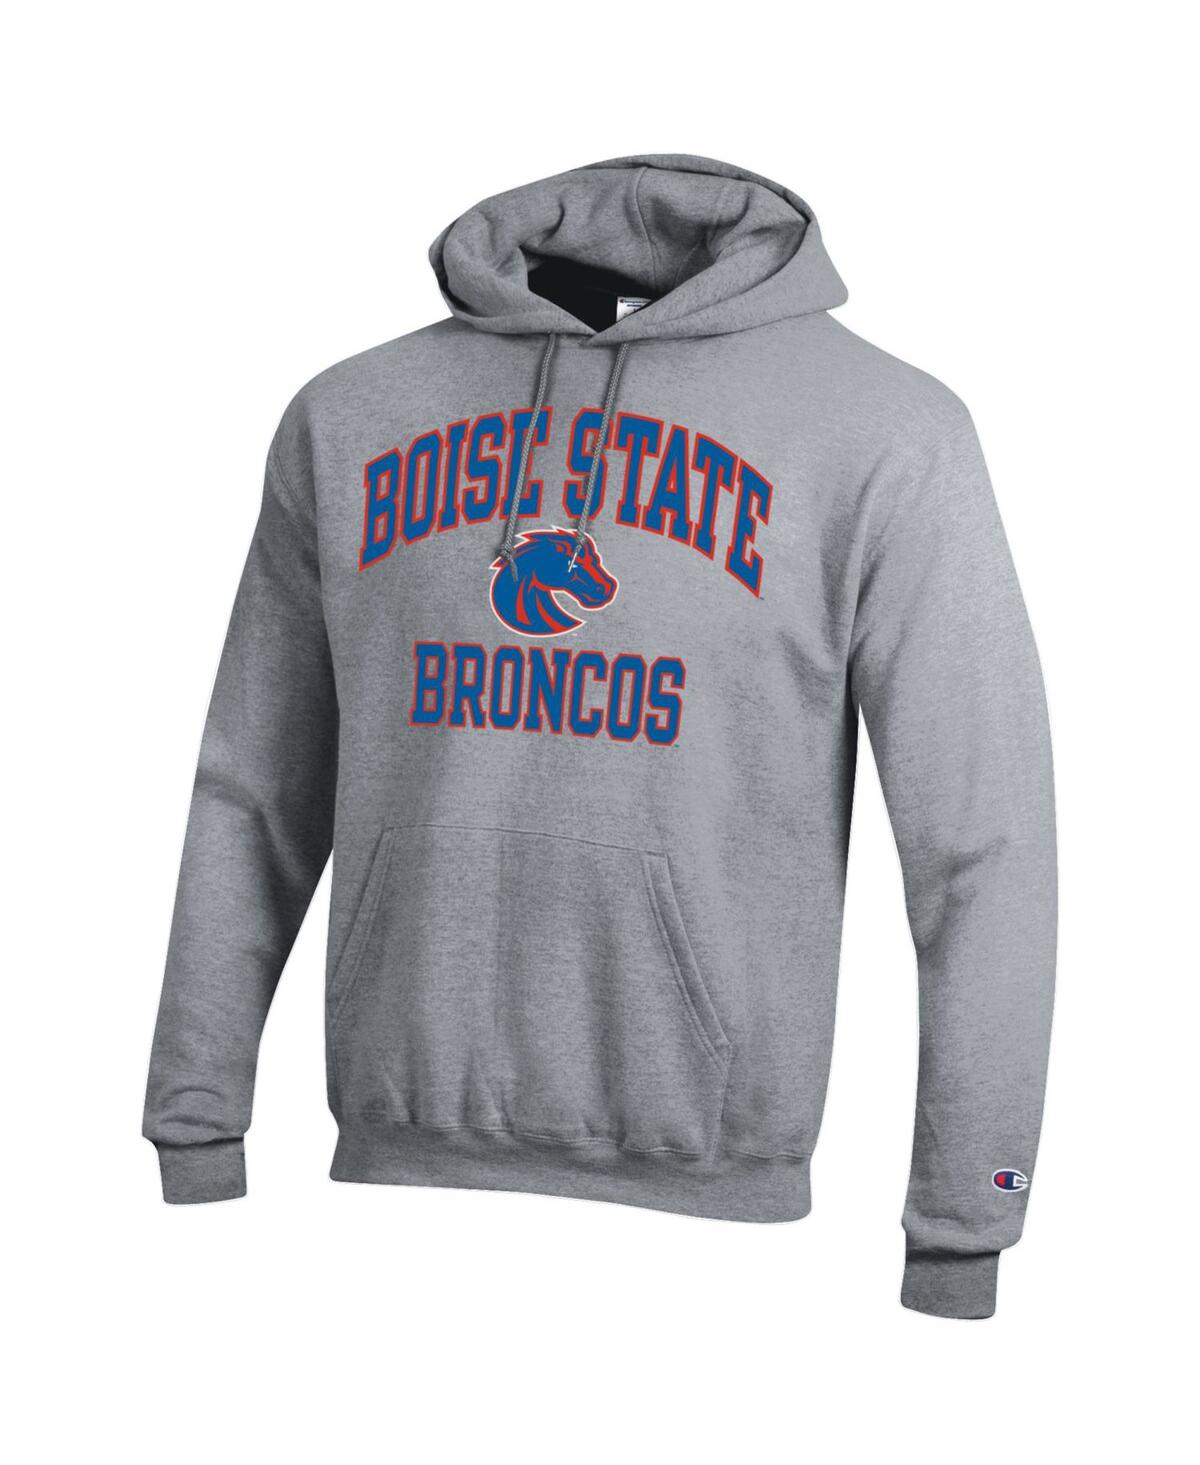 Shop Champion Men's  Heather Gray Boise State Broncos High Motor Pullover Hoodie